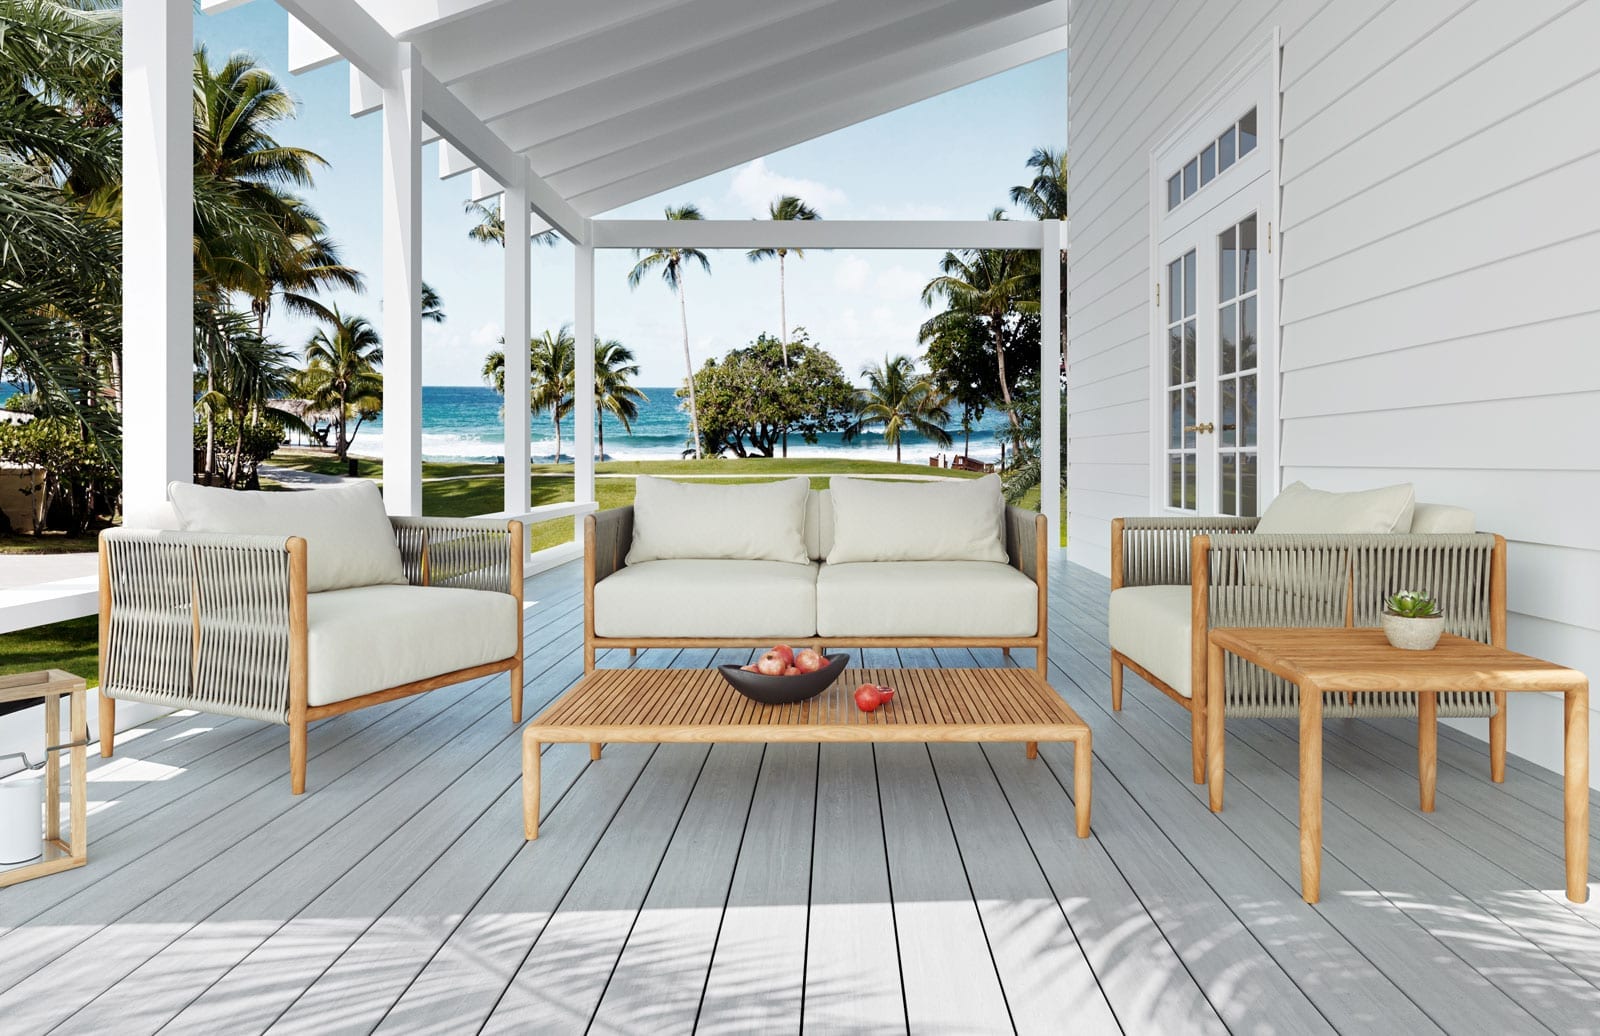 Maldives outdoor patio sofa set from Brown Jordan on a wood patio deck with tropical beachfront view